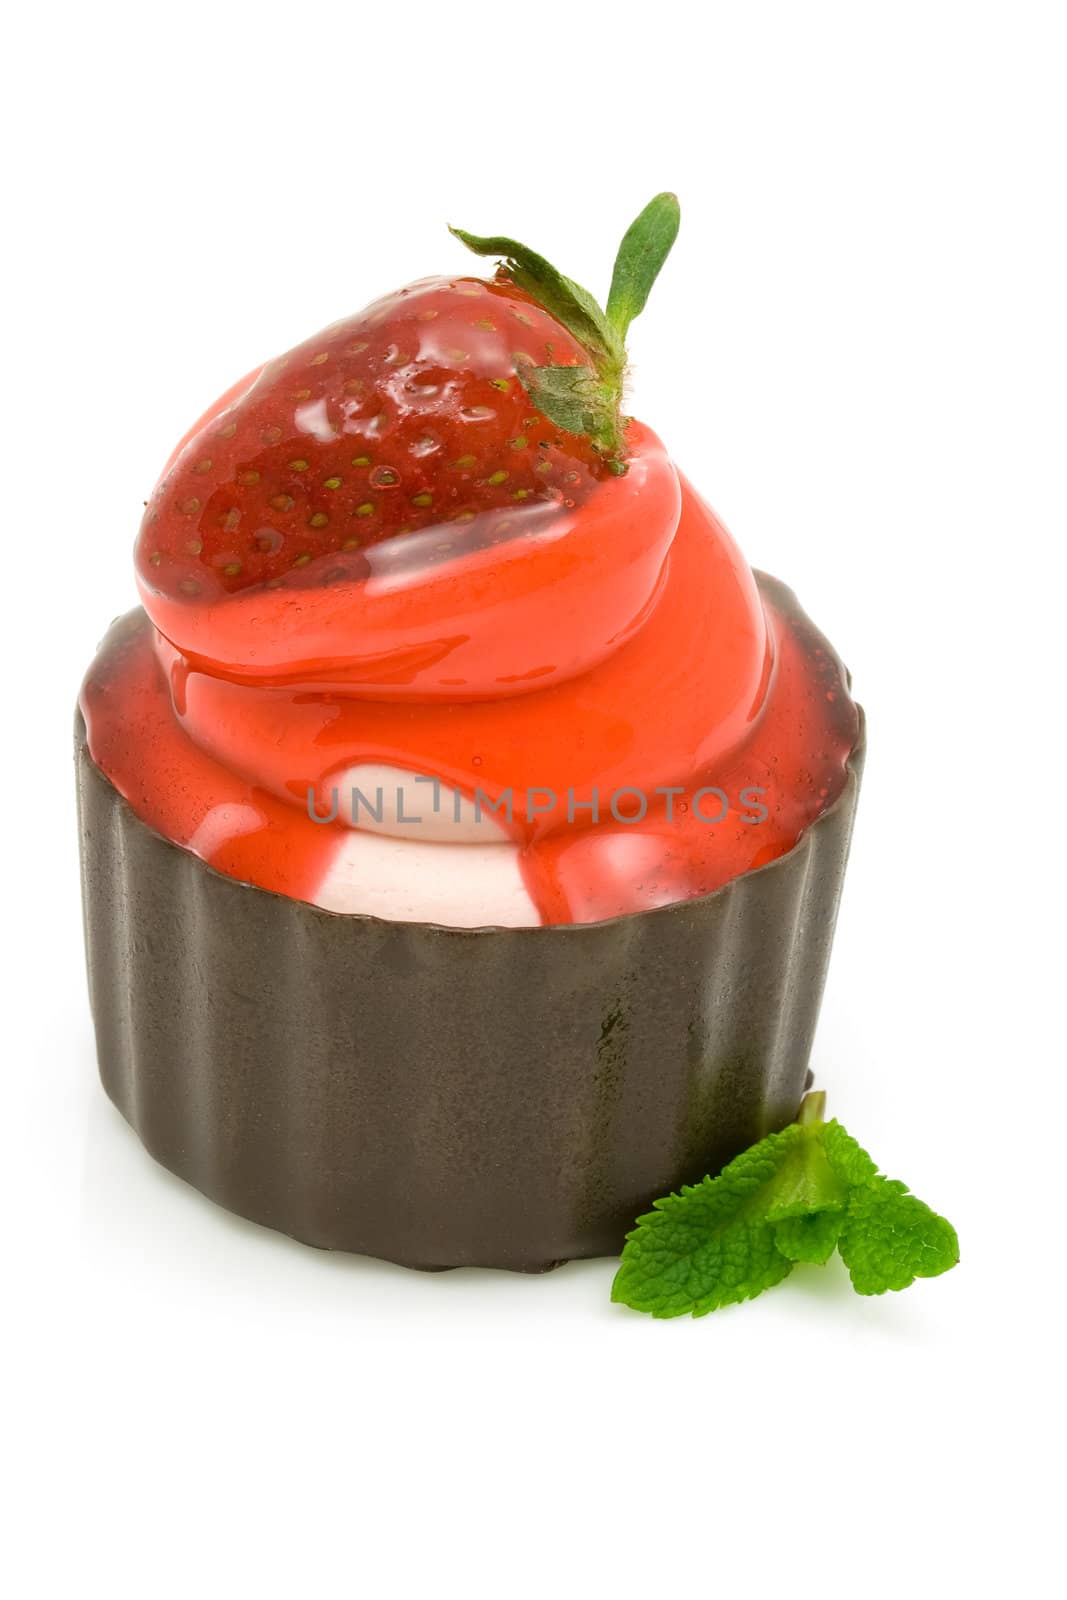 Strawberry cup cake with mint leaves on white background